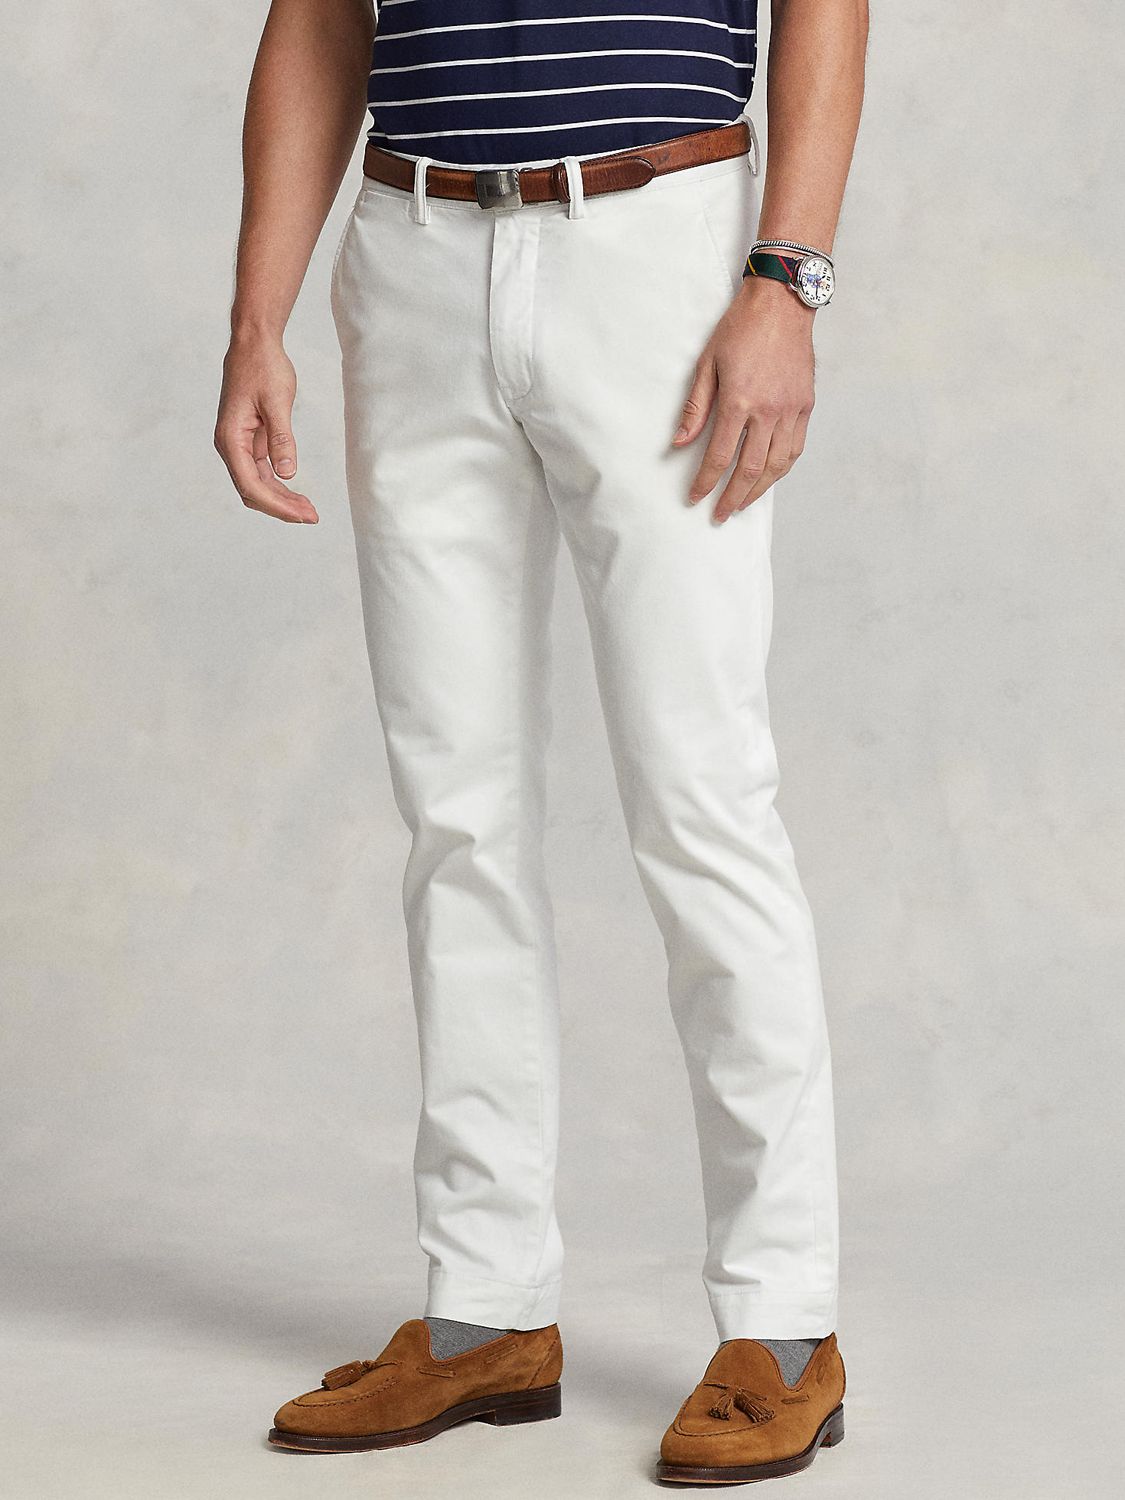 Polo Ralph Lauren Bedford Slim Fit Chinos, C094 at John Lewis & Partners